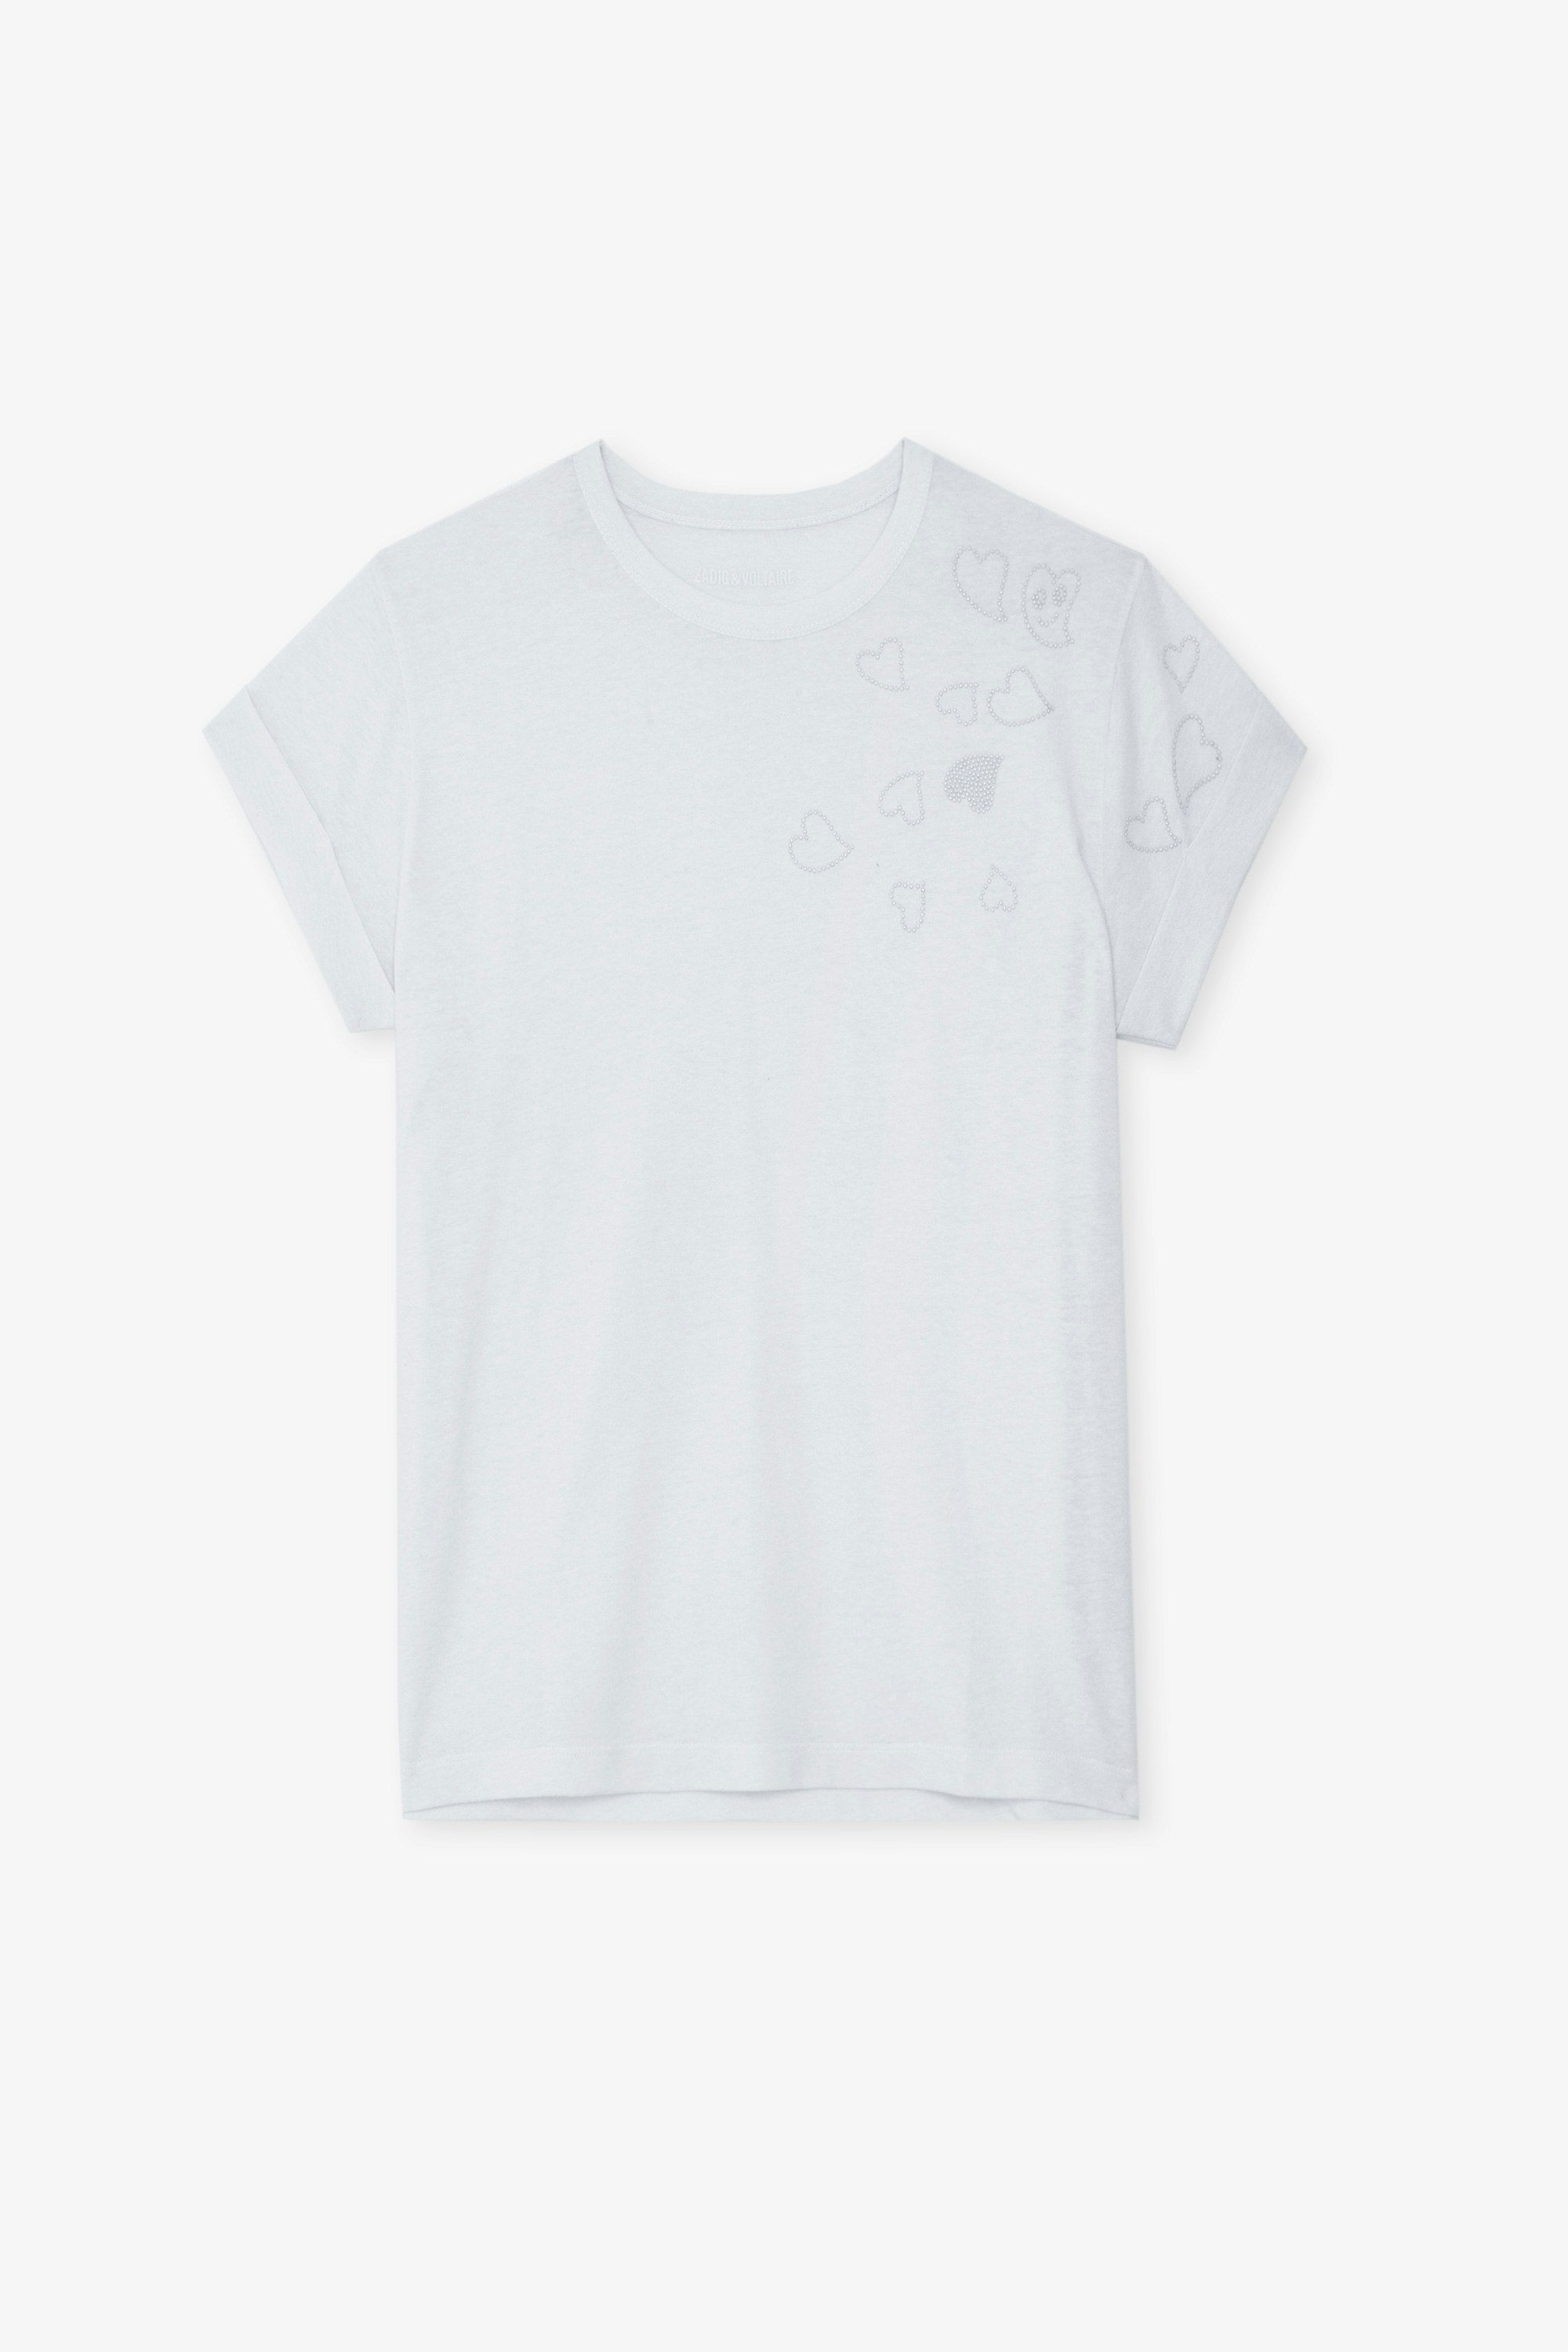 Anya T-shirt - White round-neck T-shirt with short sleeves and heart studs.